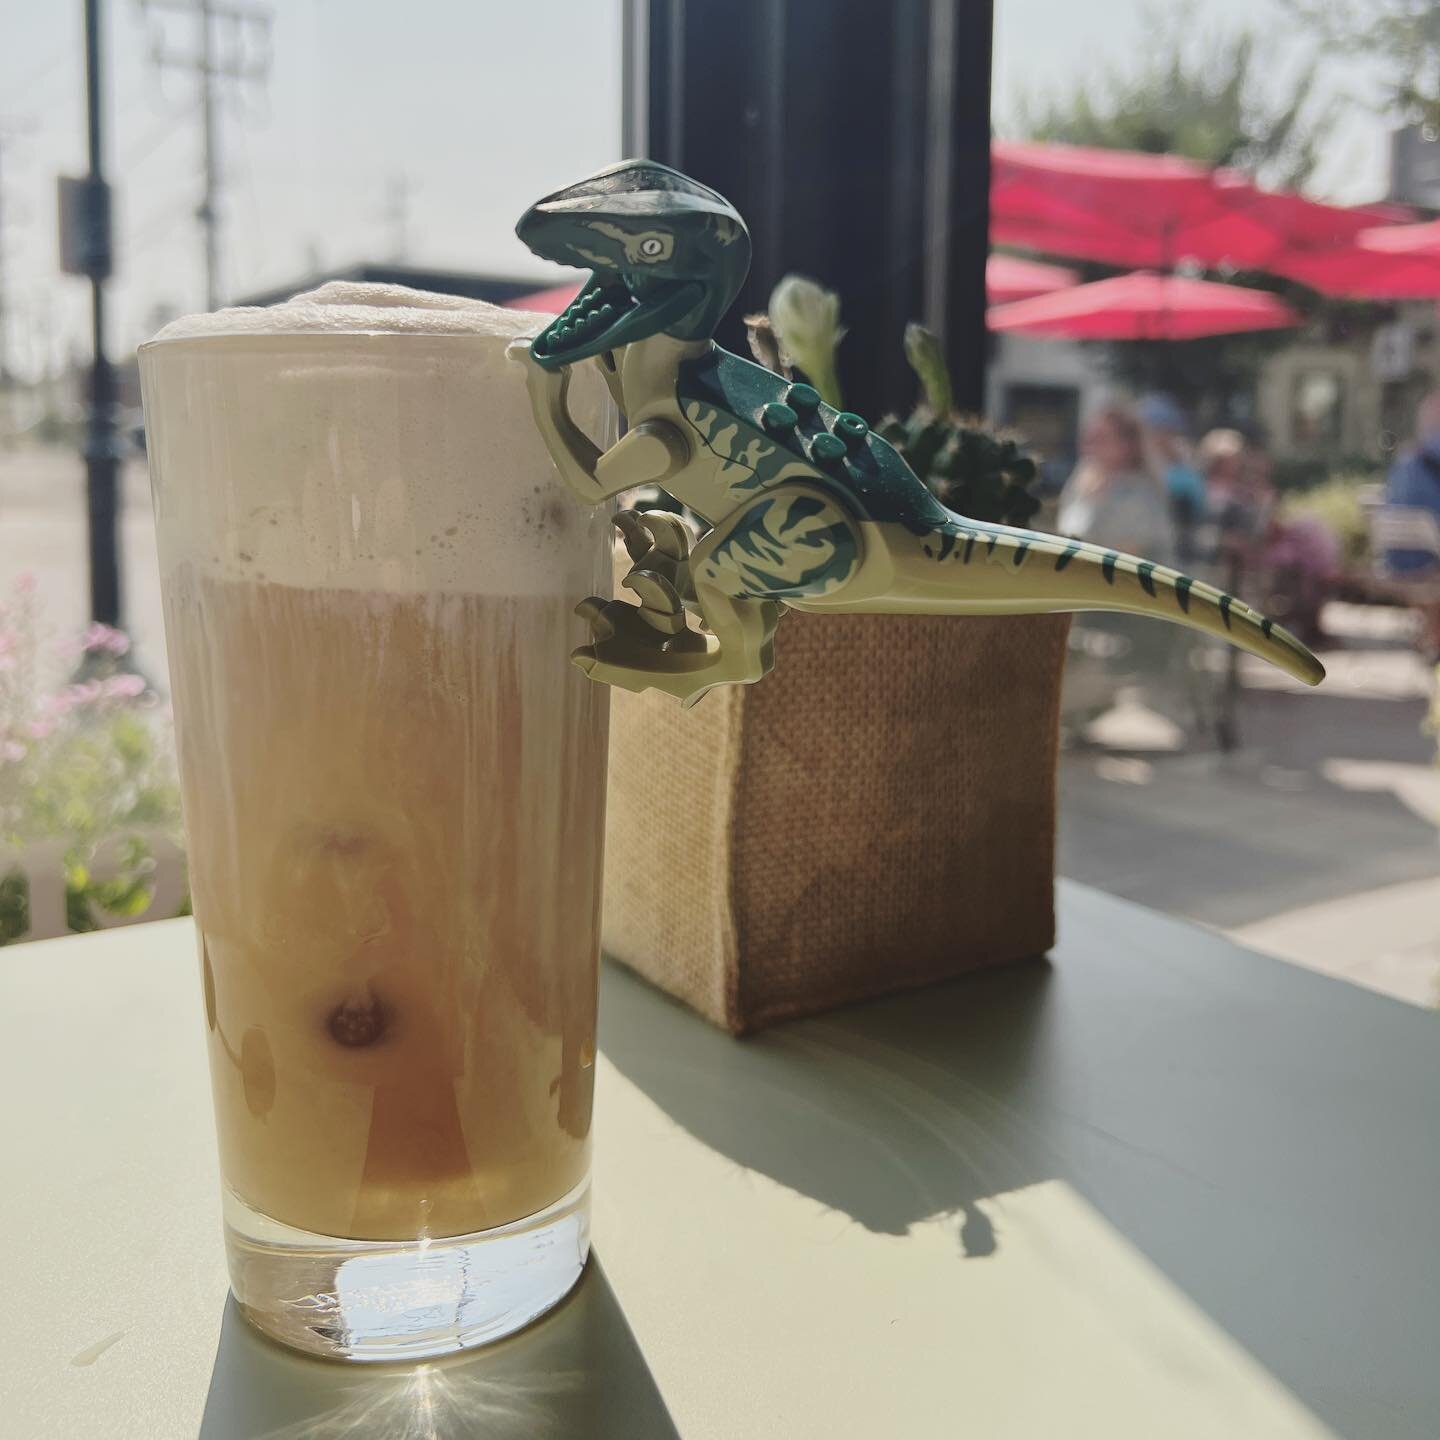 Barry says back off - this iced java is MINE! Good thing we can make another one at the coffee bar. ☕️🙃

If you ask nice next time you&rsquo;re in, I might just make one for you. 😉 (No guarantees this lil&rsquo; wild one won&rsquo;t snag it from yo